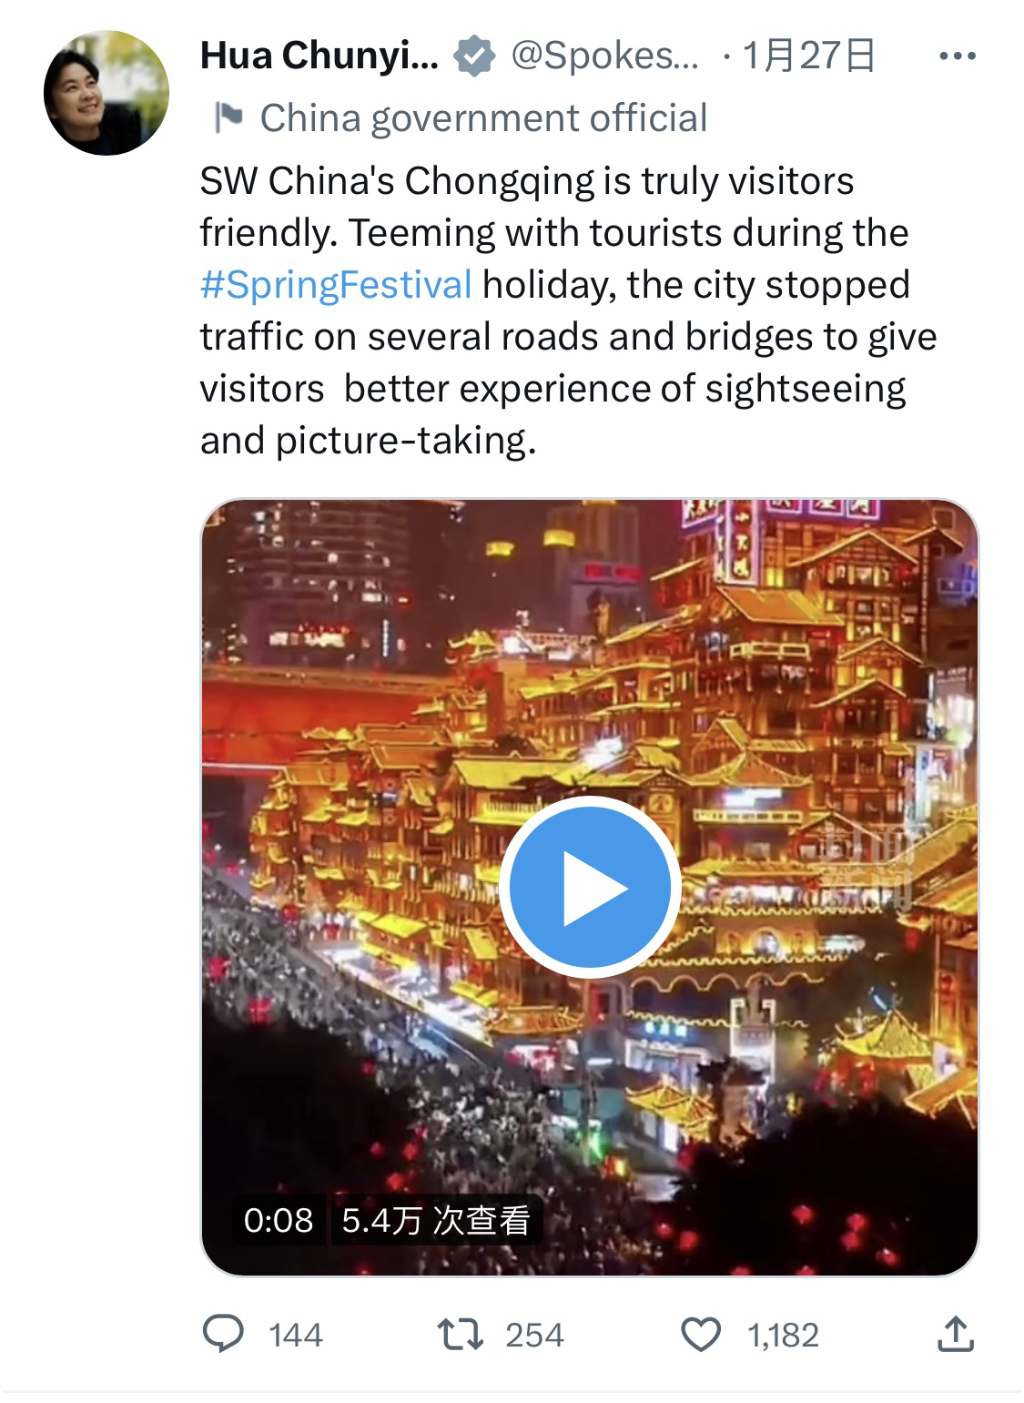 Hua Chunying posted a message on the social platform and praised the behavior of “visitors friendly” by closing bridges and roads during the Spring Festival holiday in Chongqing. (Tweet Screenshot)